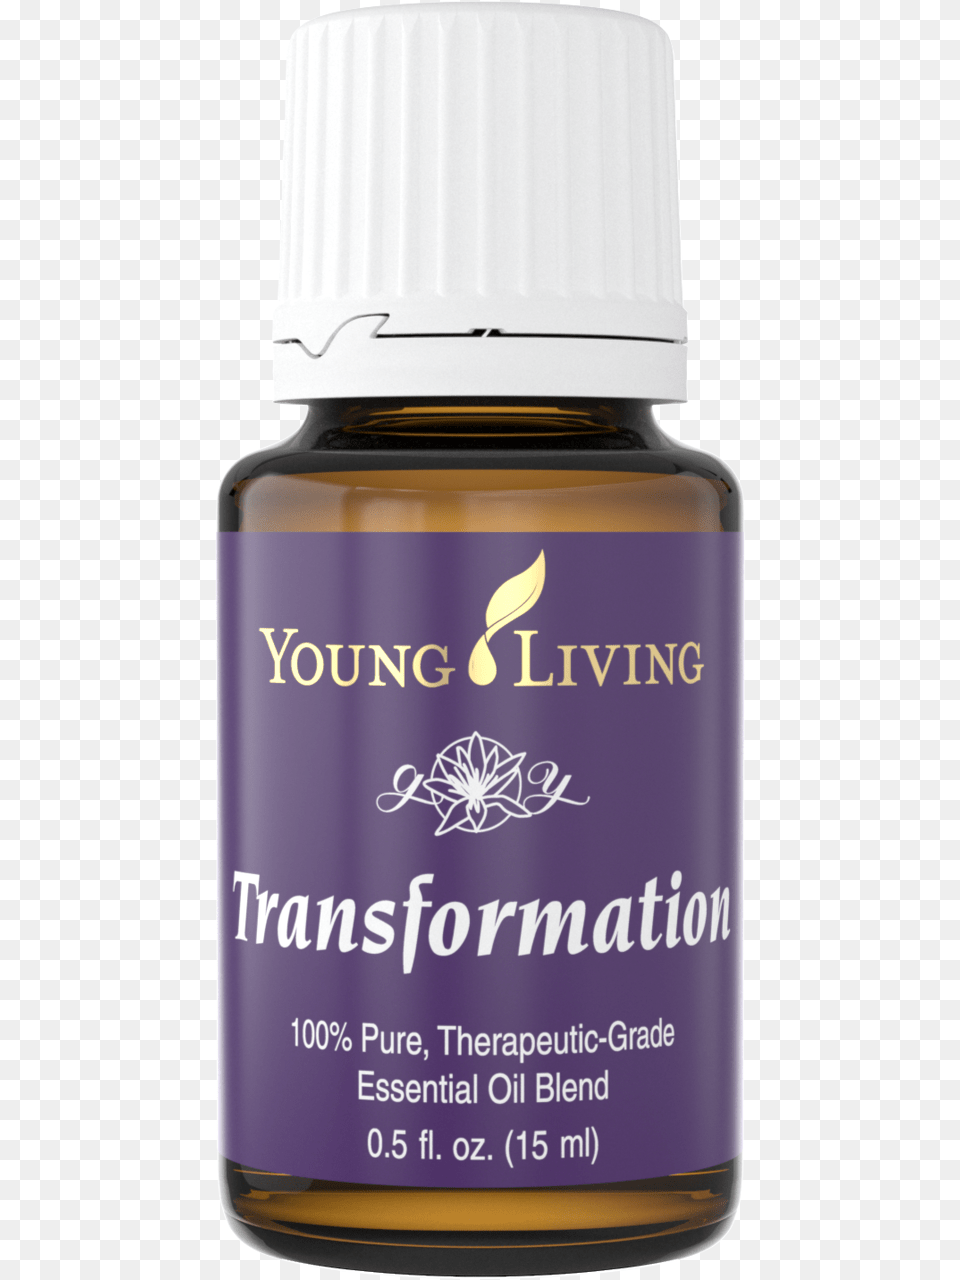 Transformation Essential Oil Blend 15 Ml Bottle Saw Palmetto, Herbal, Herbs, Plant, Cosmetics Free Transparent Png